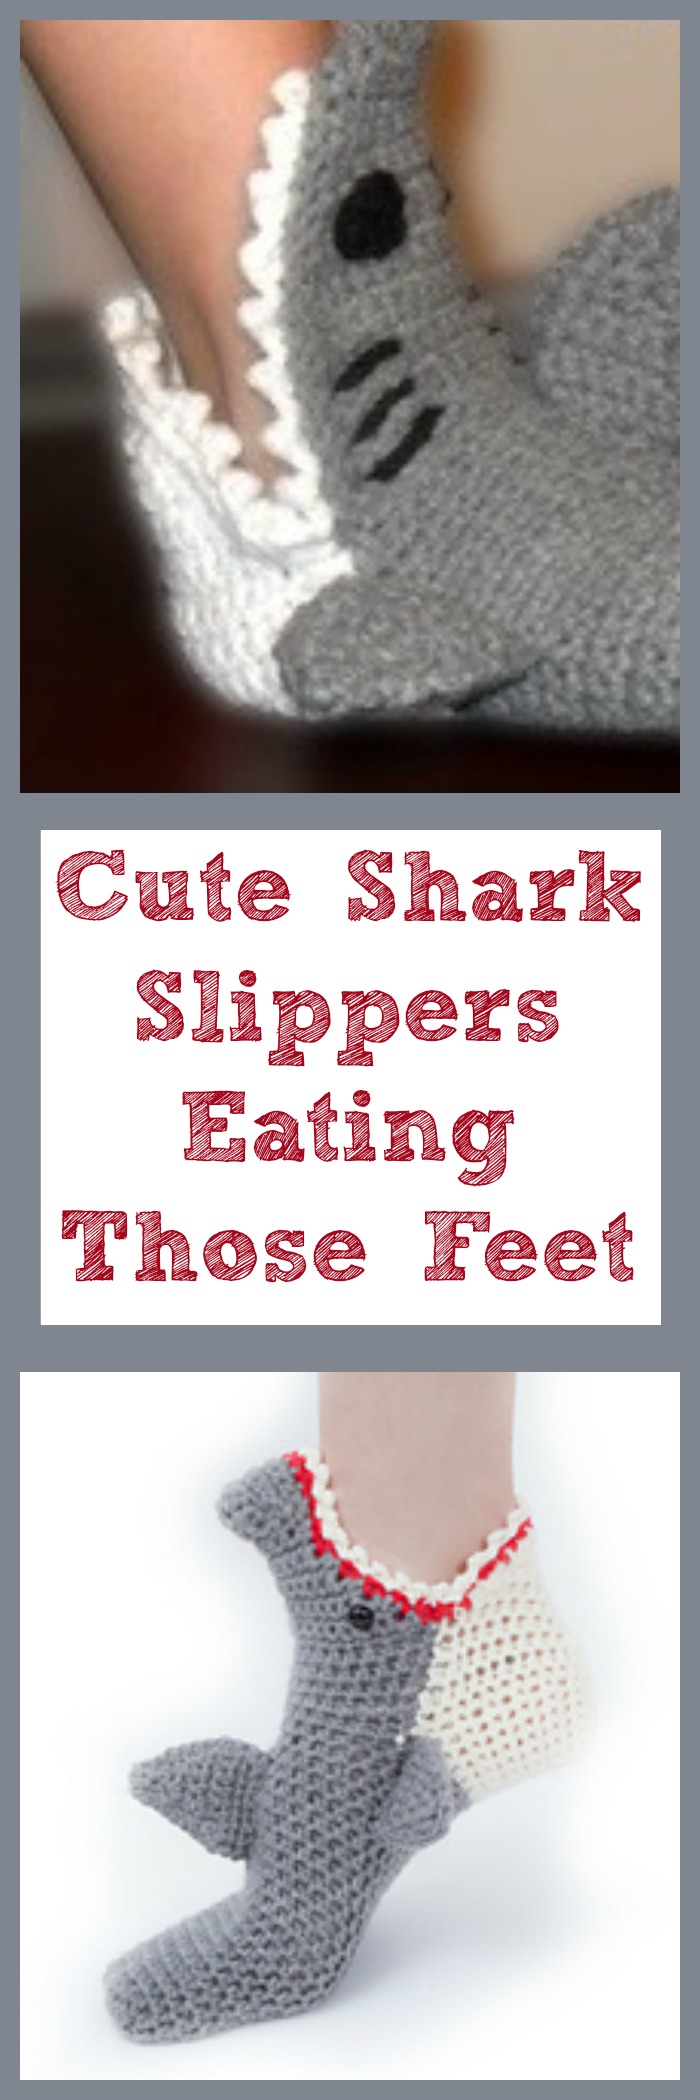 Looking for cute shark slippers eating feet? These cute patterns will help you make your own shark slippers or buy some already made. 